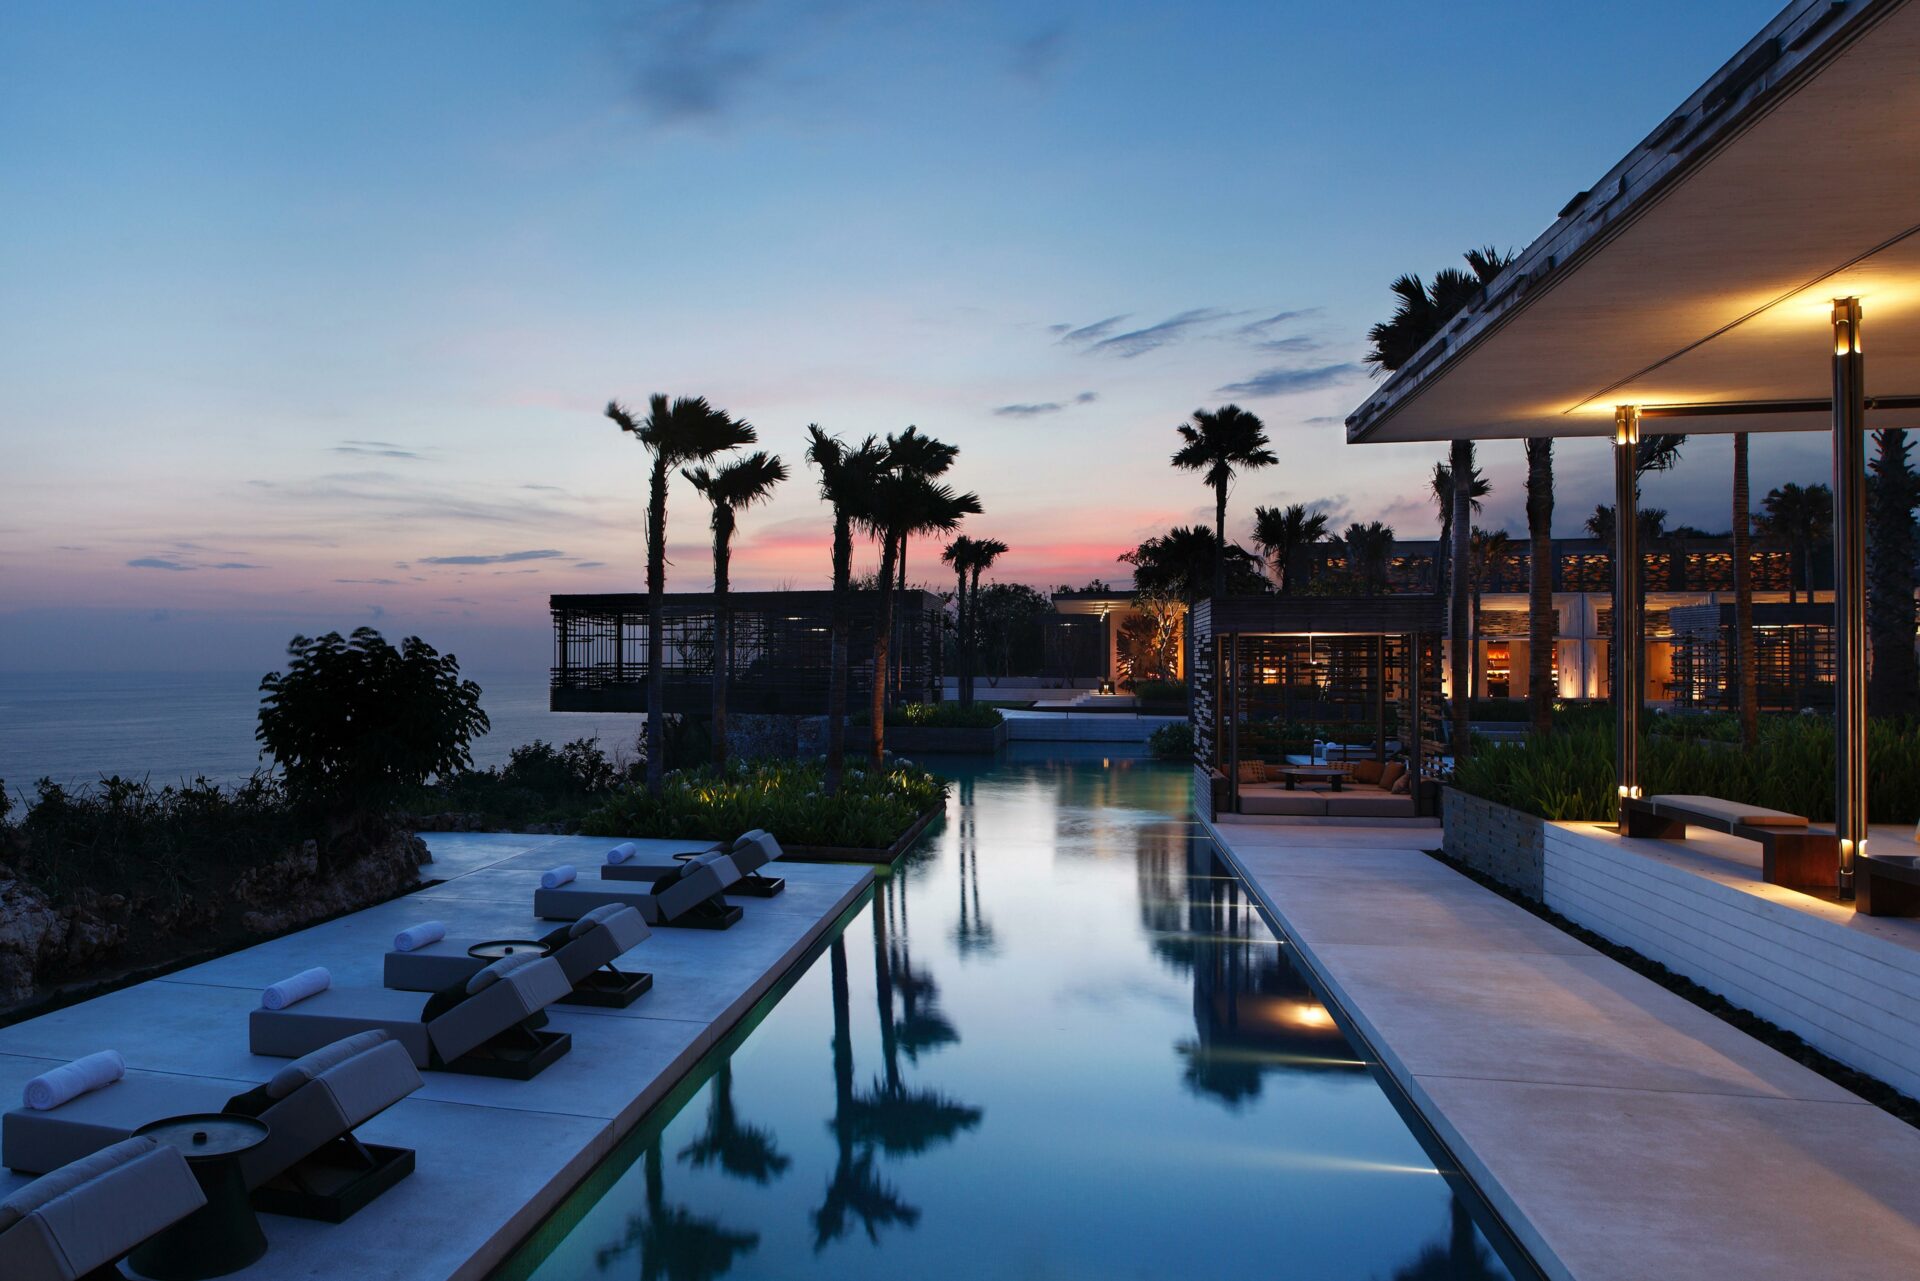 Sunset over the pool at Alila Villas